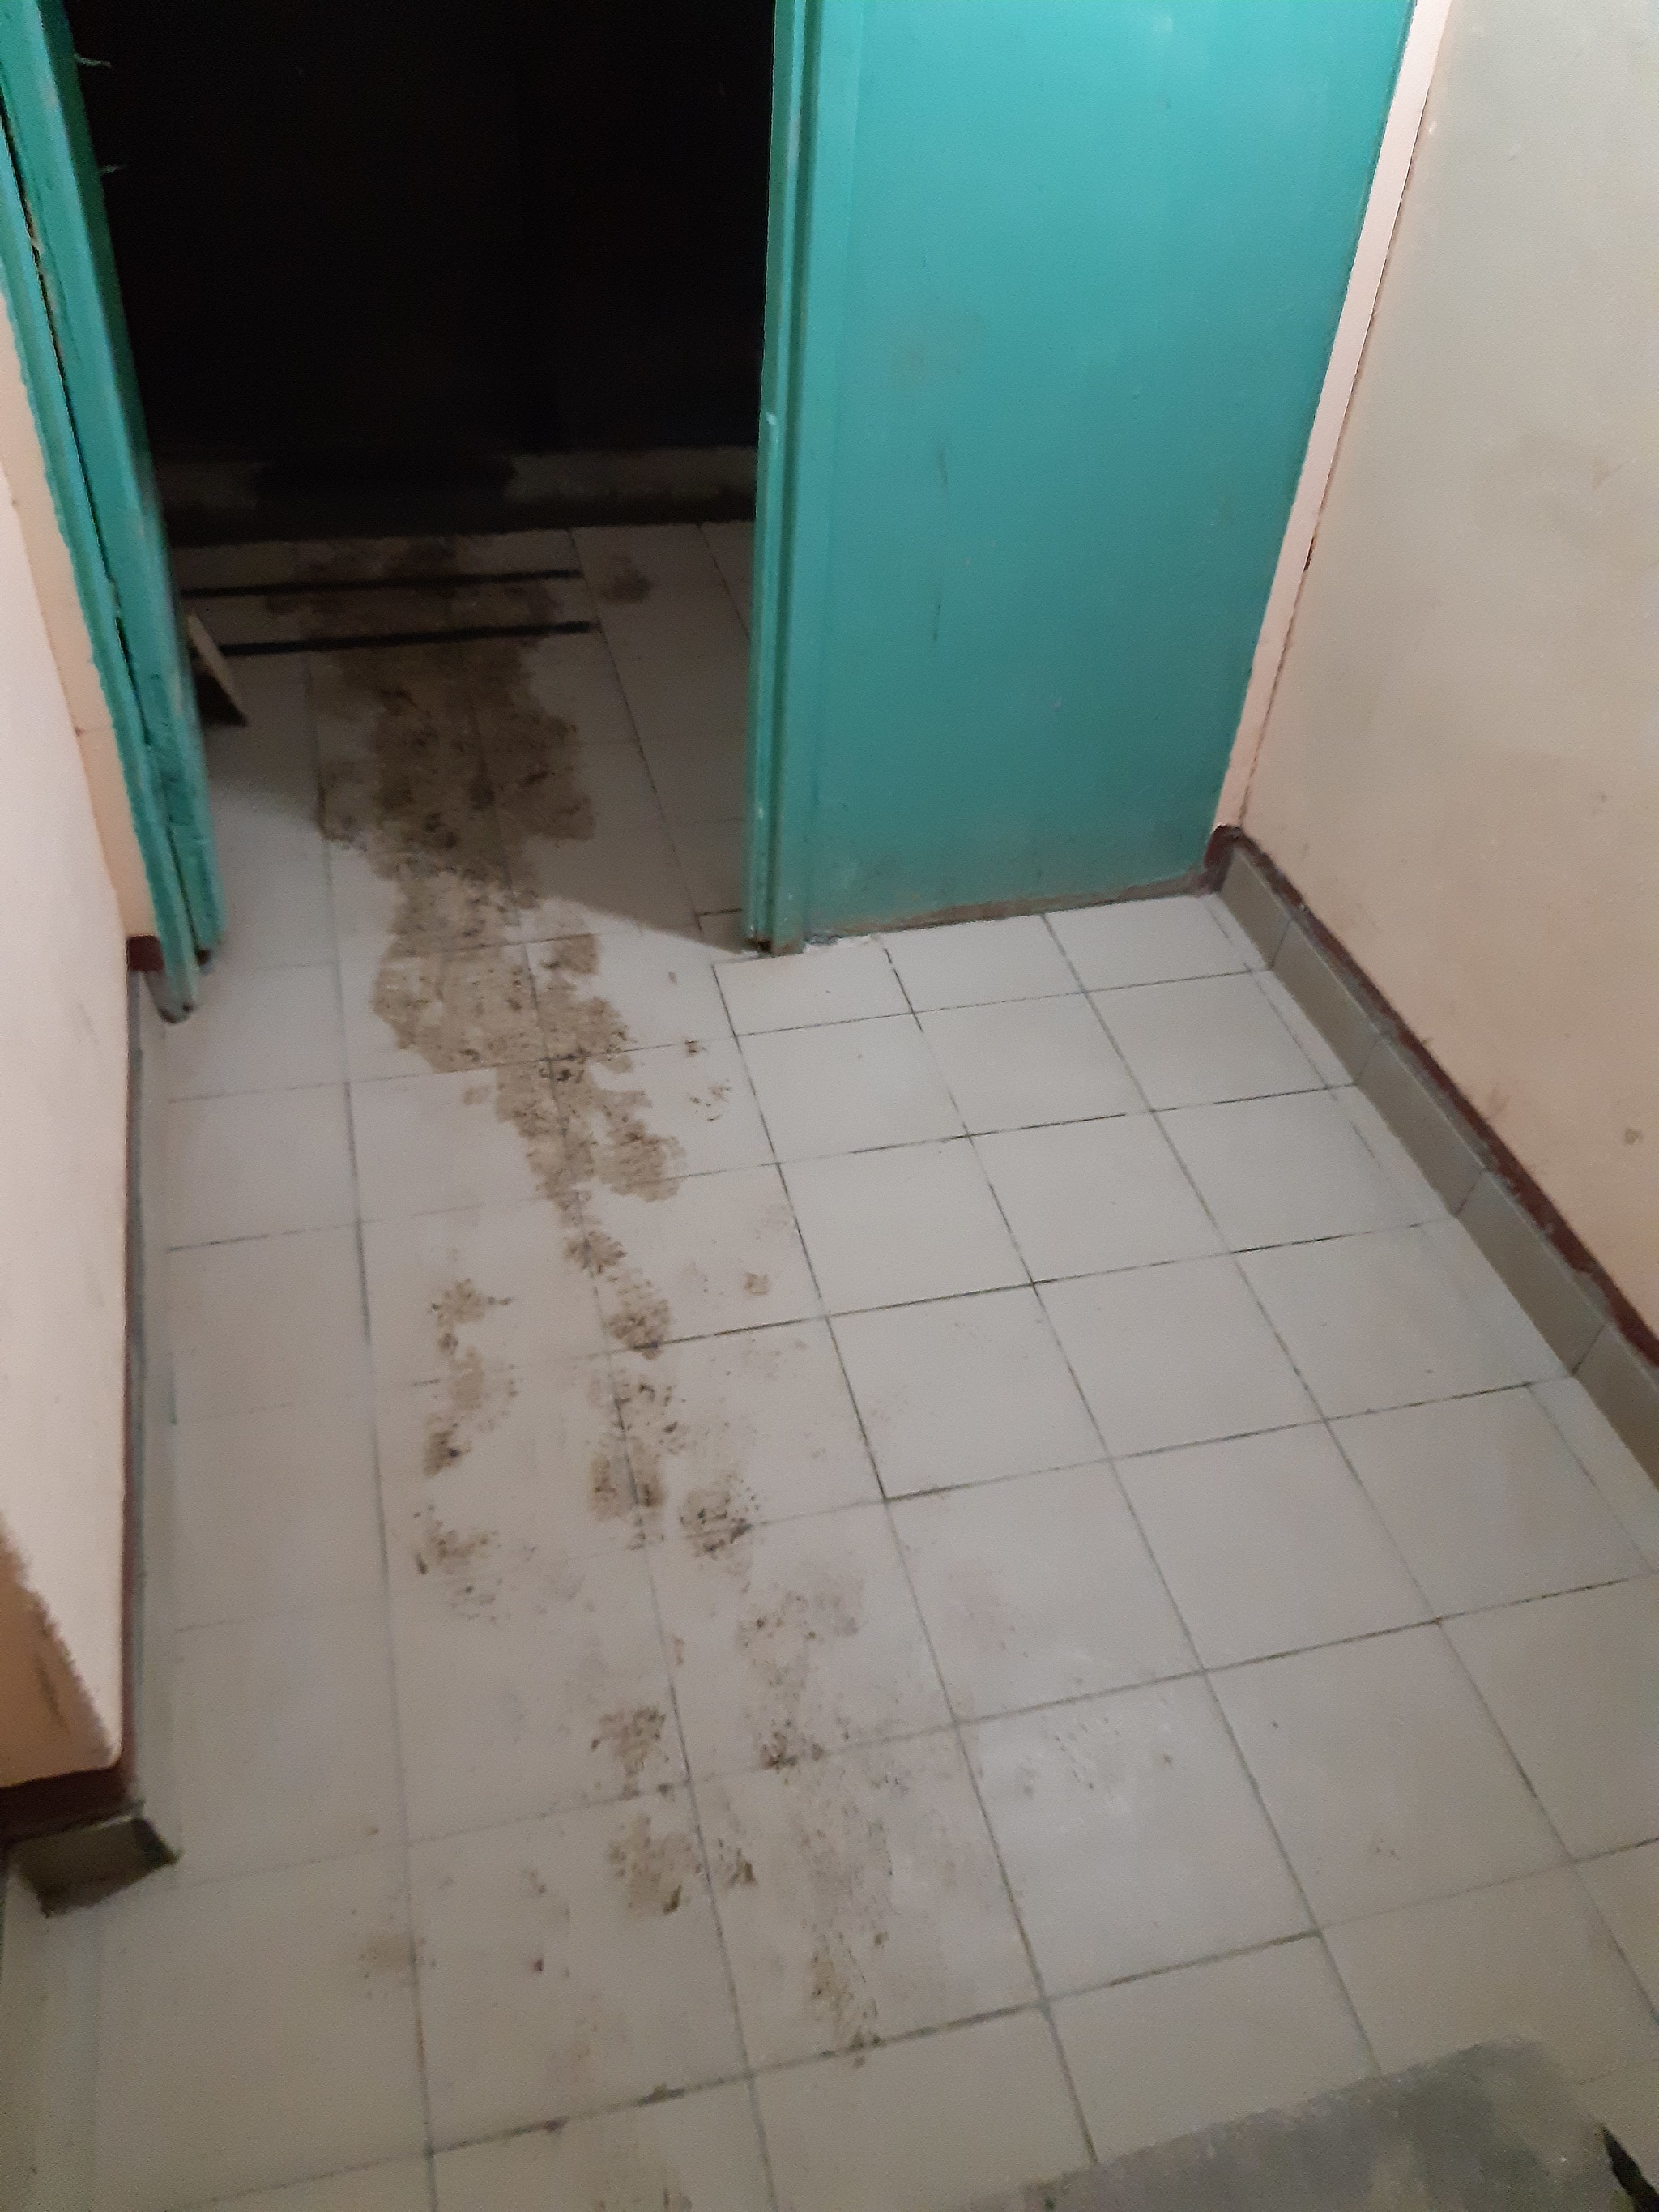 Post #7257270 - My, Entrance, Housing and communal services, Tiles on the floor, Longpost